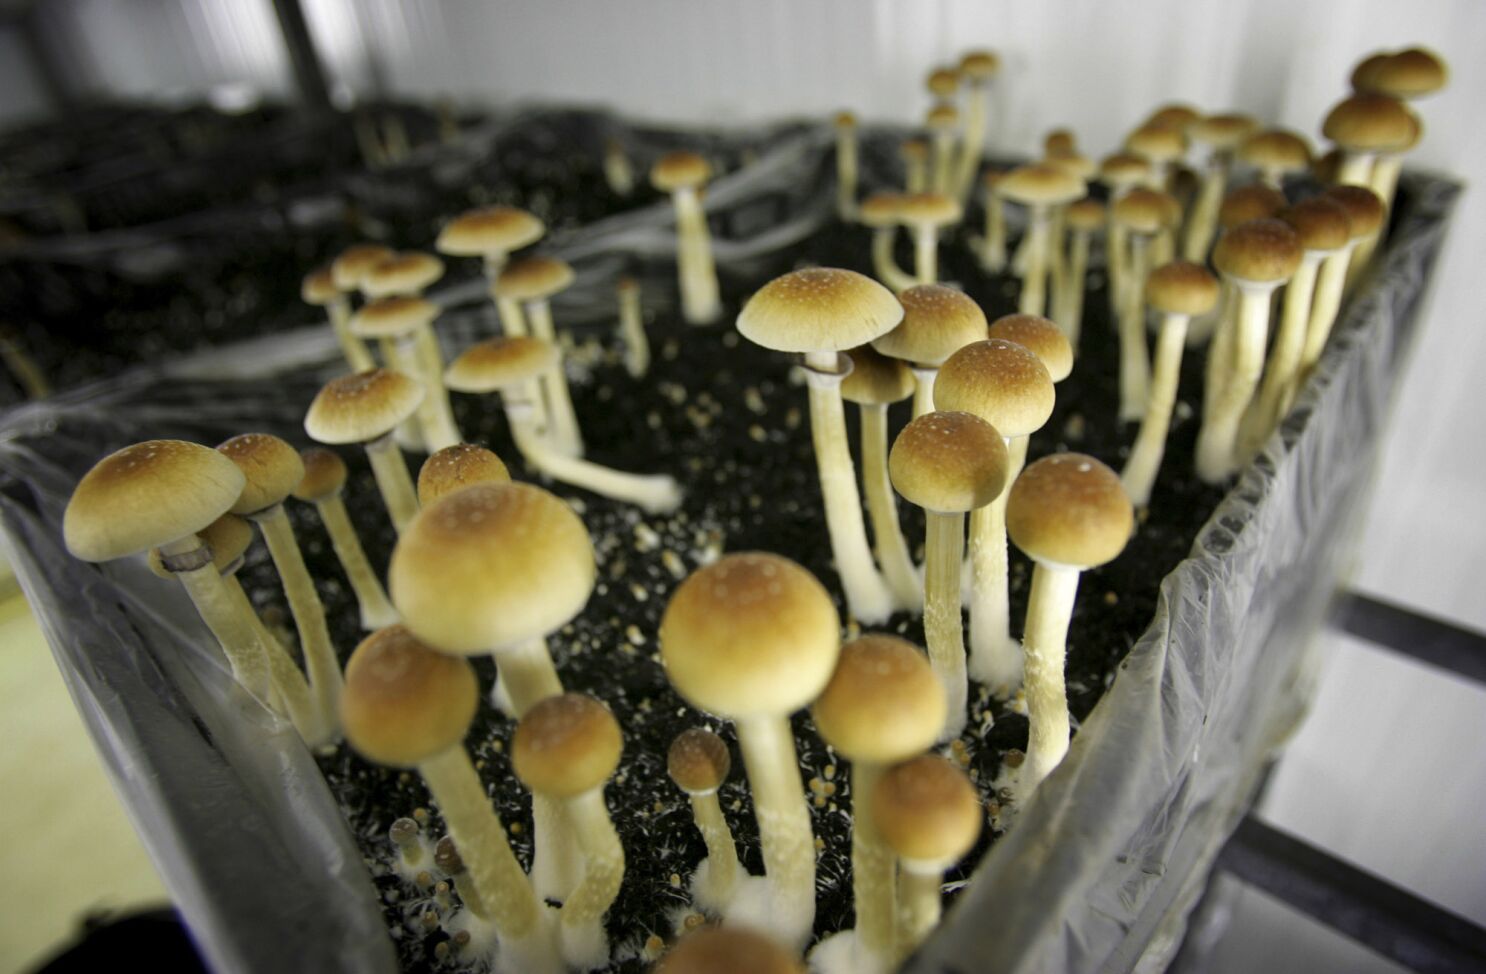 Denver therapists use magic mushrooms to help patients - Los Angeles Times